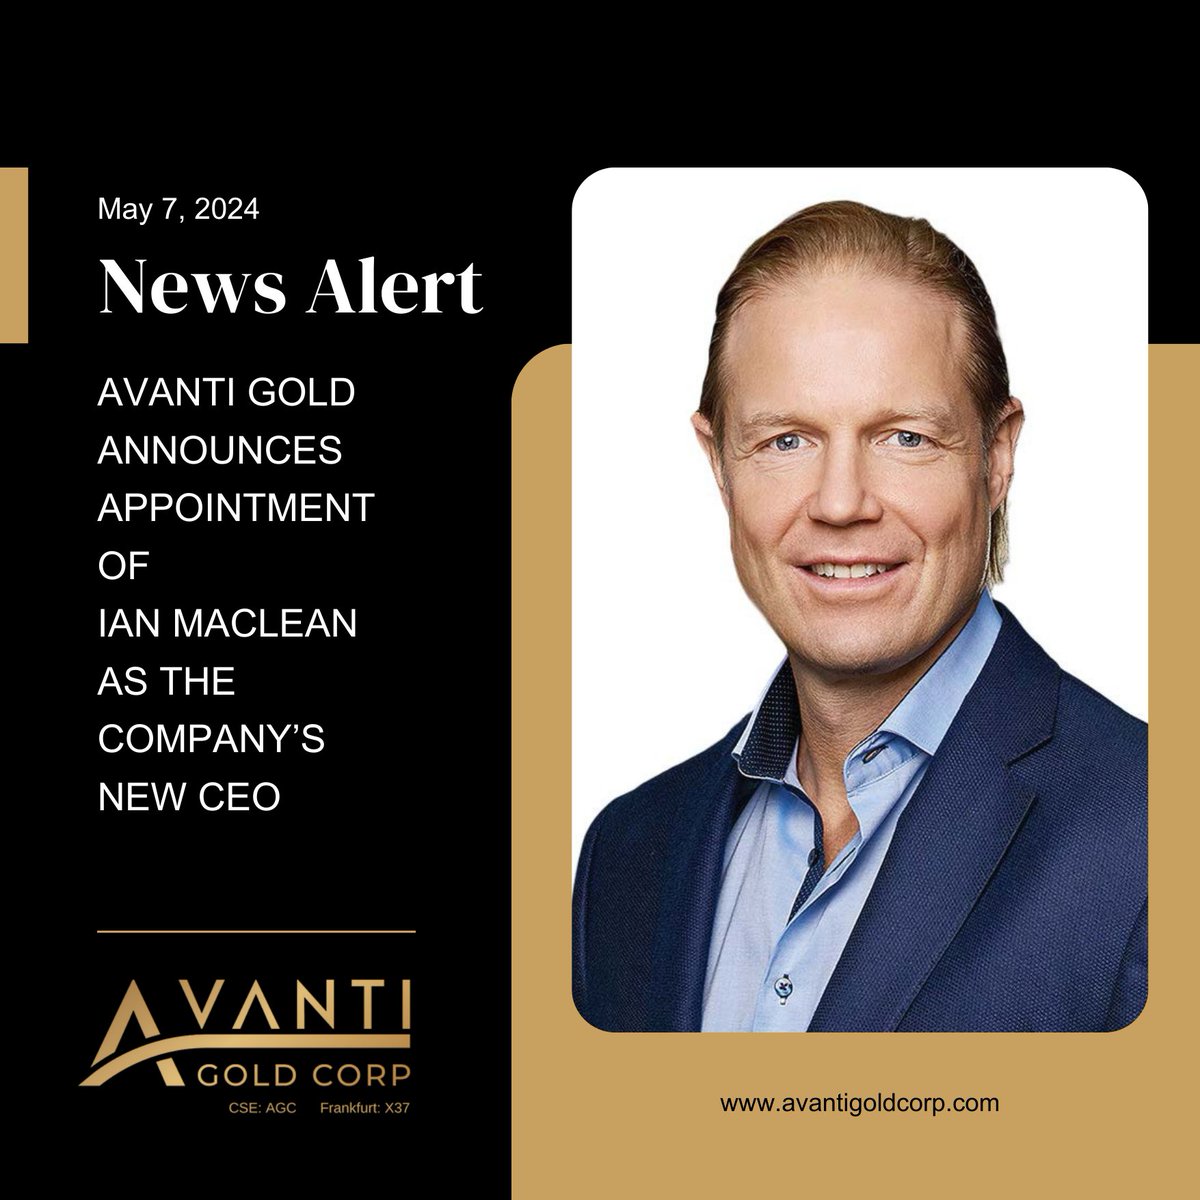 𝐂𝐋𝐈𝐄𝐍𝐓 𝐍𝐄𝐖𝐒 𝐀𝐋𝐄𝐑𝐓 📣 @Avanti_Gold is pleased to announce that Ian MacLean, former Vice President of Investor Relations at B2Gold Corp., has been appointed as the Company's new Chief Executive Officer.

🔗Read more: tinyurl.com/yeyt9pr6

#ad #sponsoredcontent